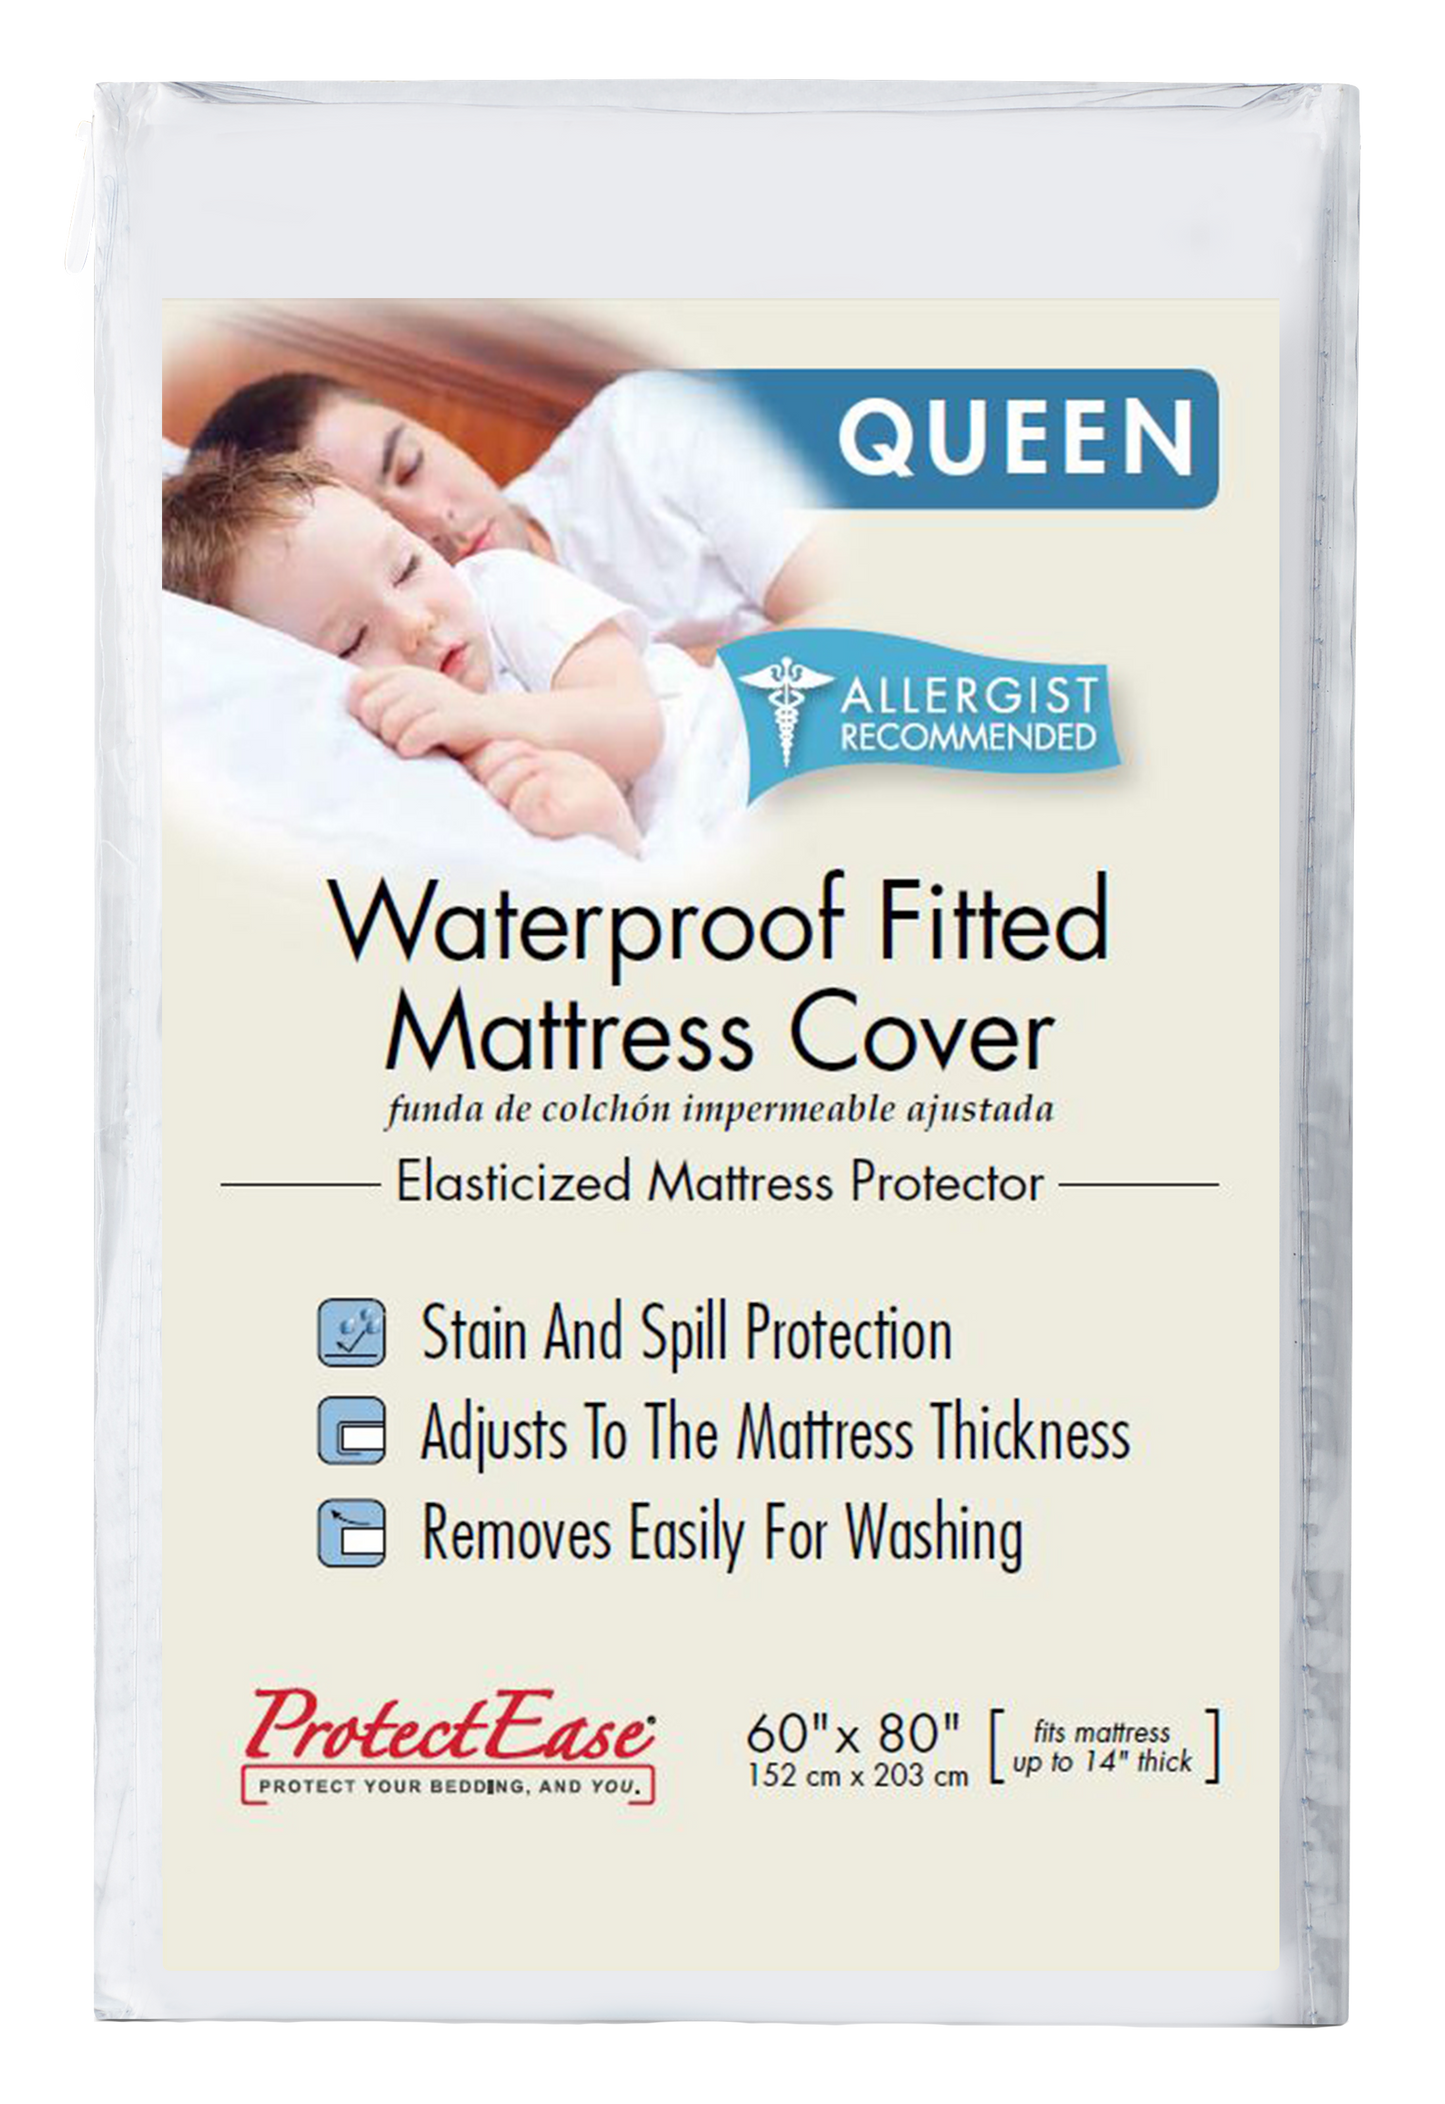 Premium Waterproof Fitted Mattress Cover